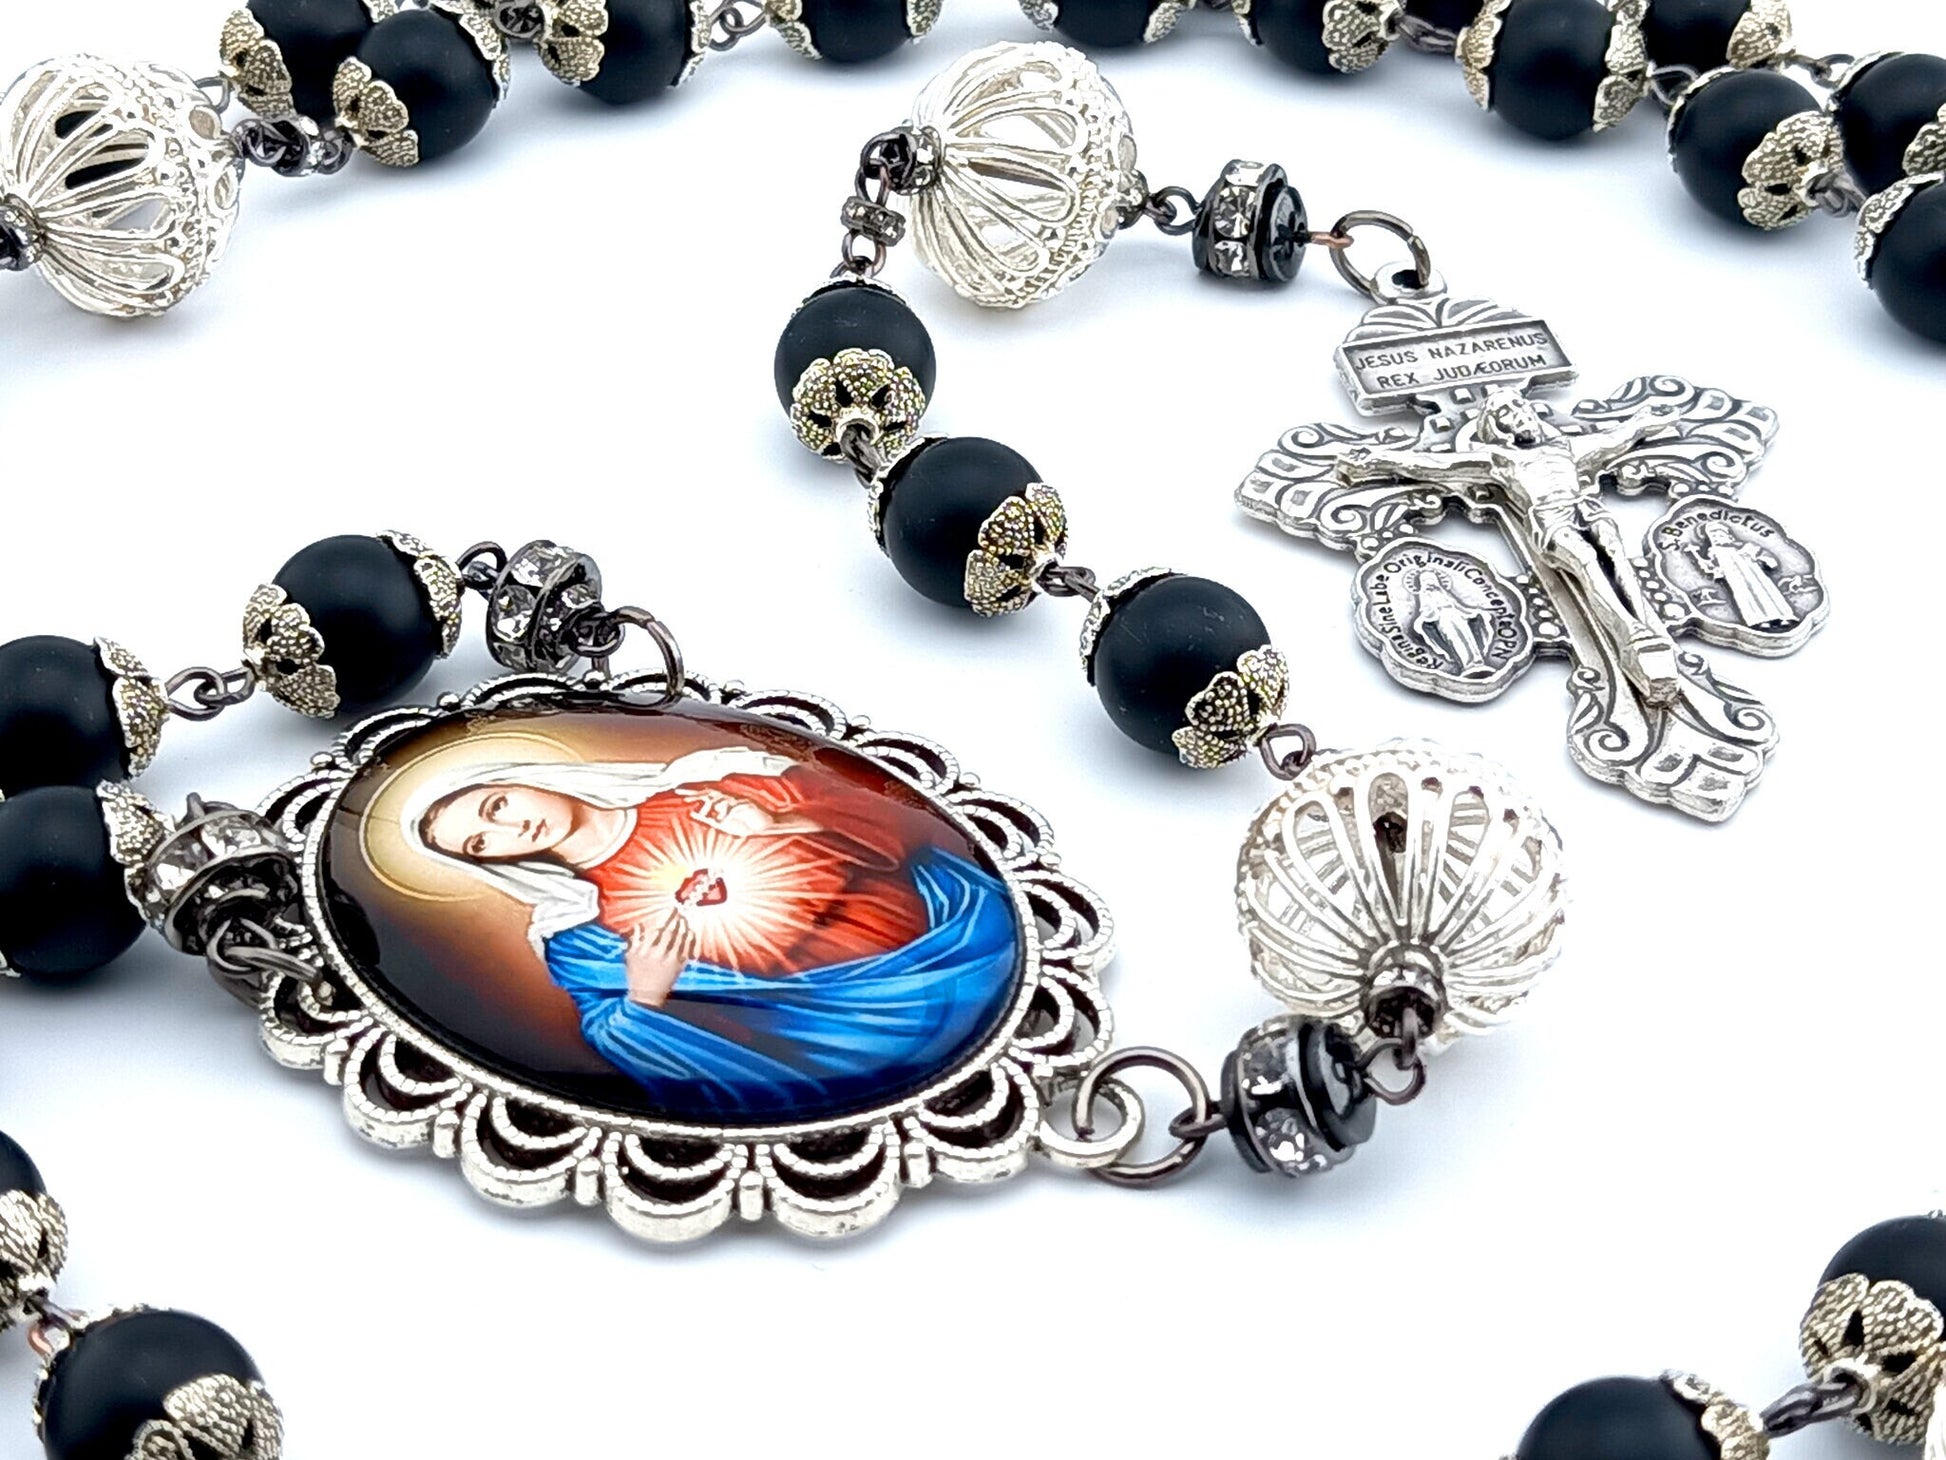 Immaculate Heart of Mary unique rosary beads with onyx gemstone beads, silver filigree pater beads, picture centre medal and pardon crucifix.